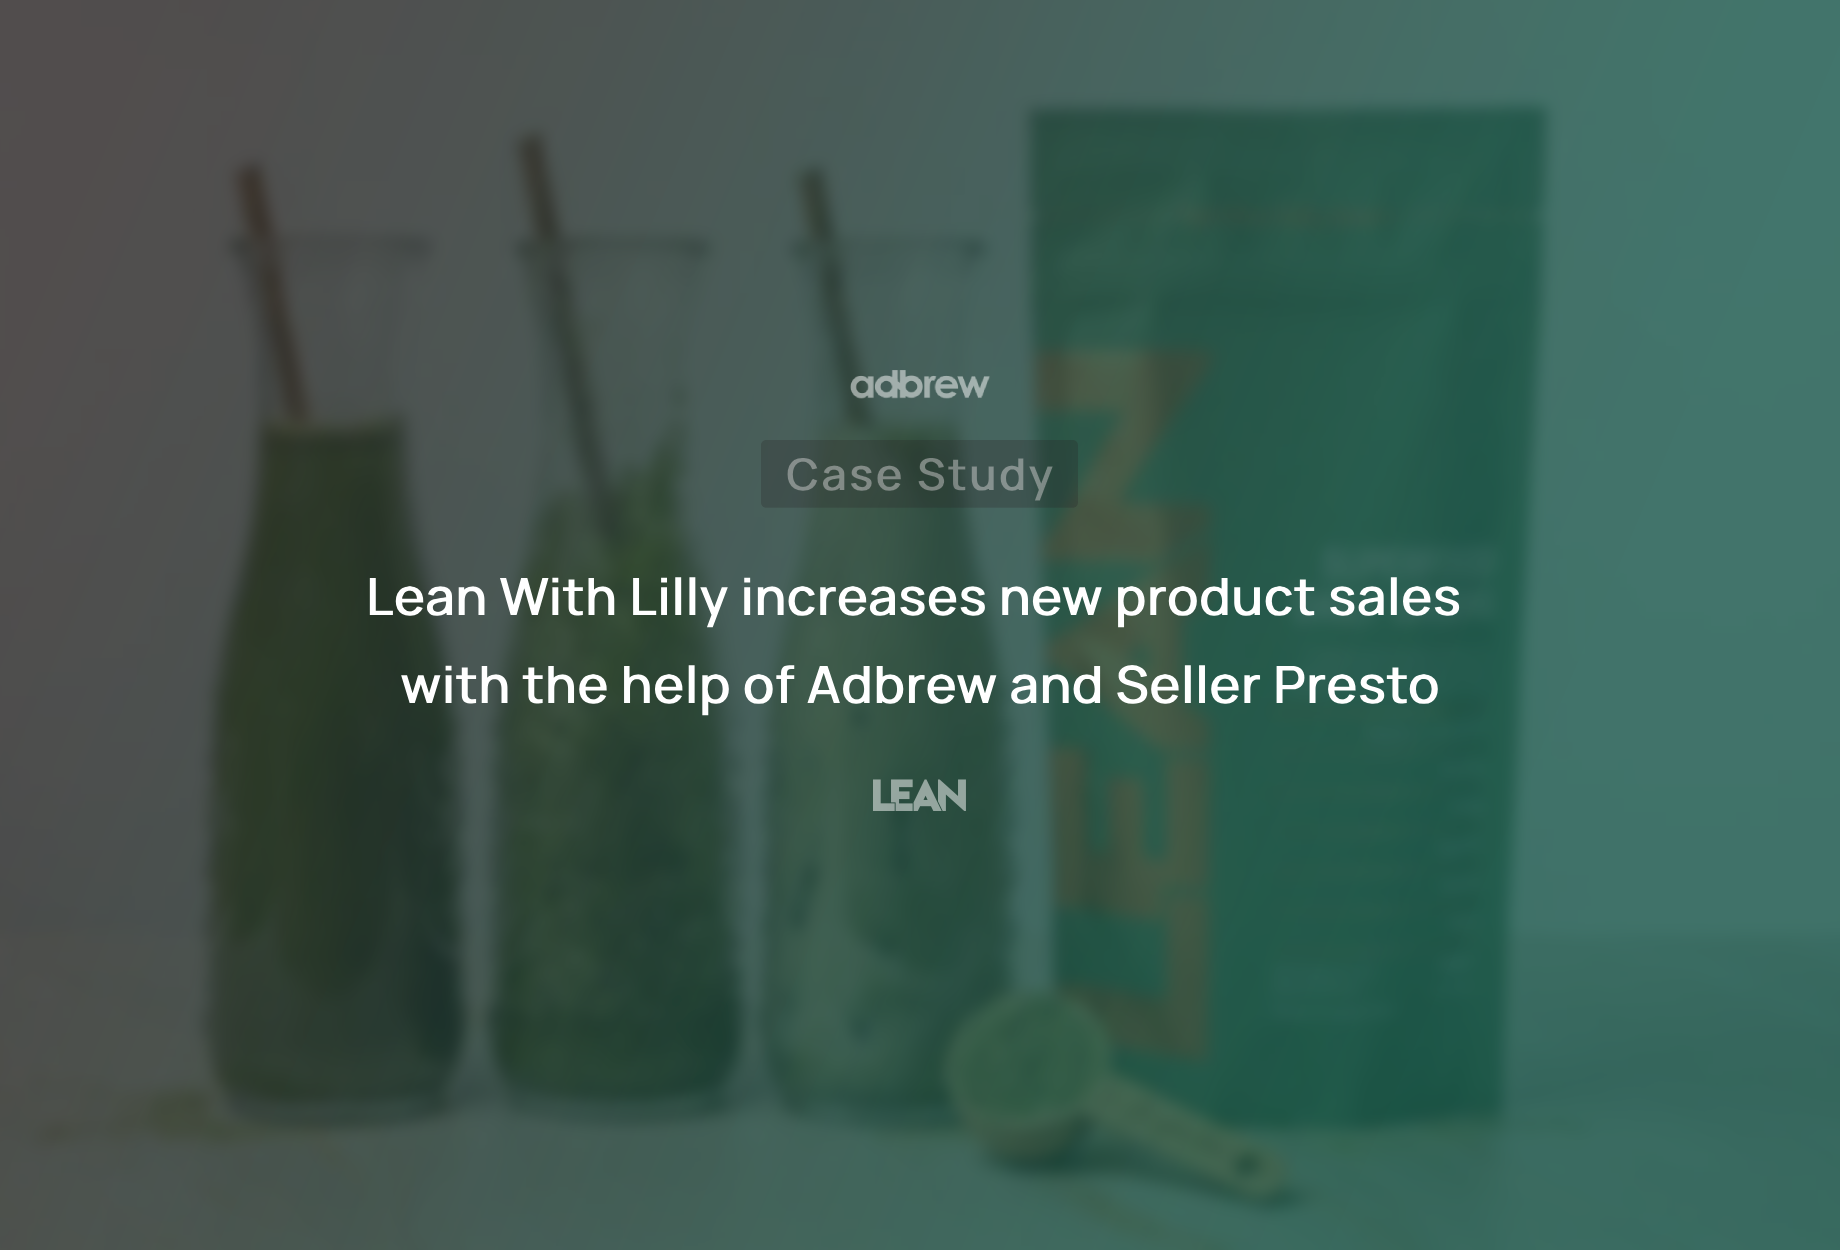 Lean With Lilly increases new product sales with the help of Adbrew and Seller Presto